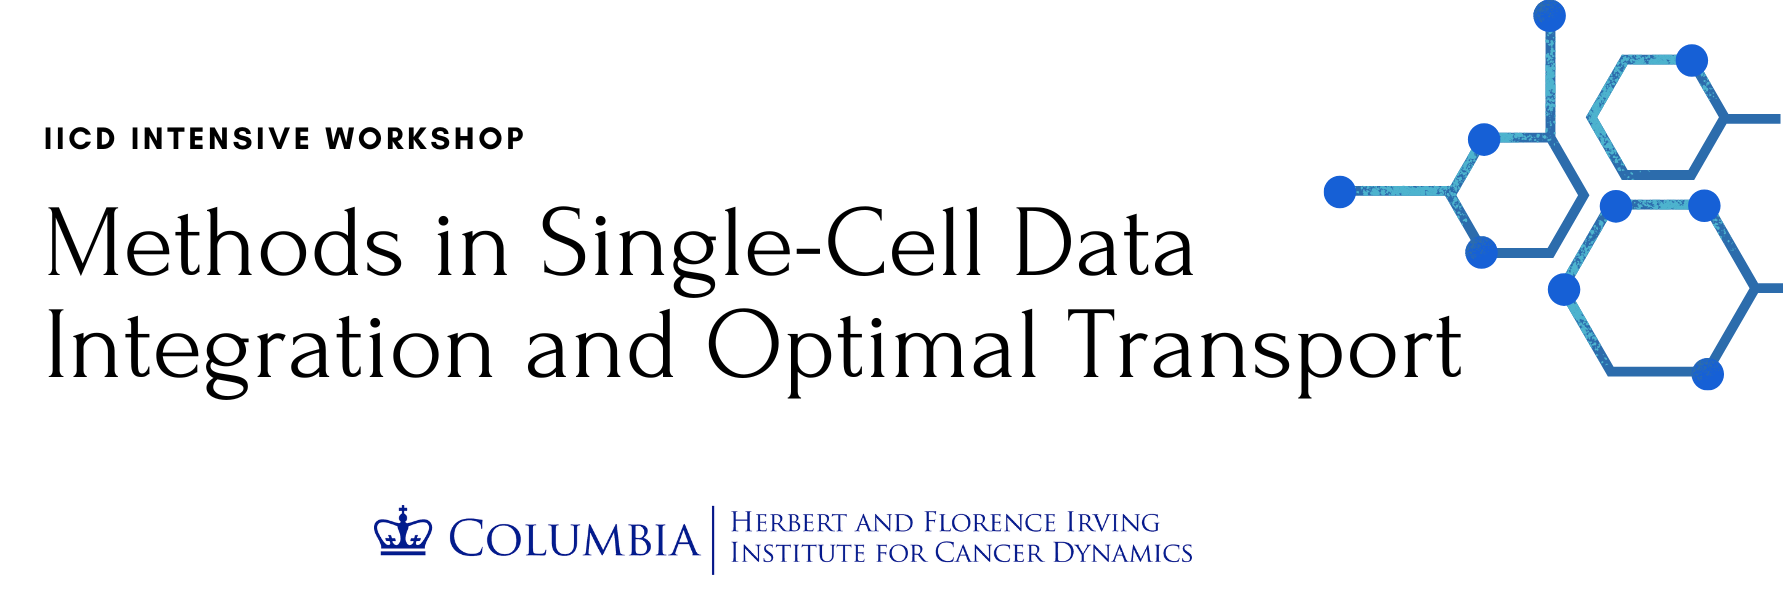 IICD Intensive Workshop Methods in Single-Cell Data Integration and Optimal Transport